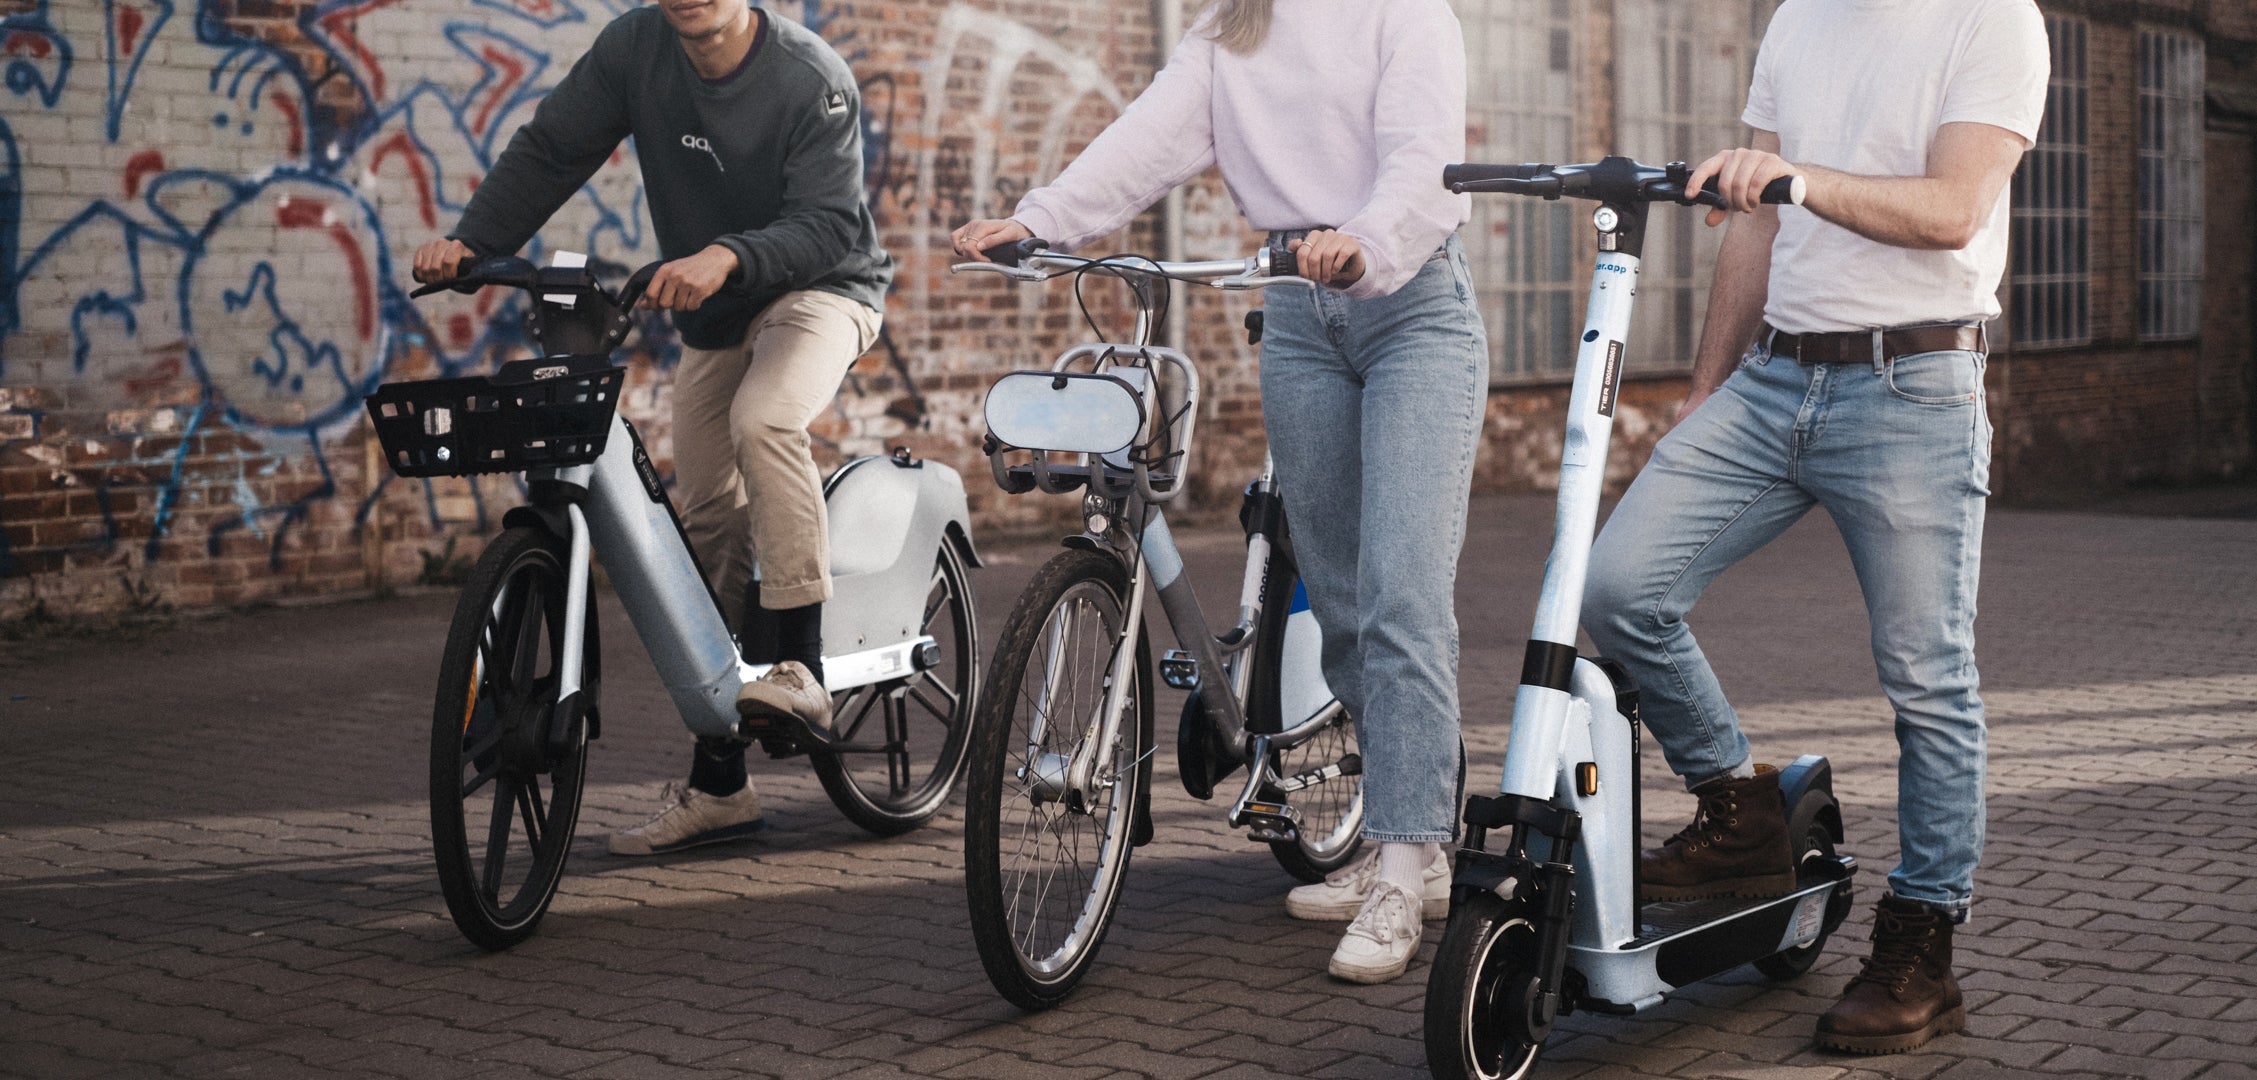 E-Bike vs. Electric Scooter: Which is the Better Commuting Option?